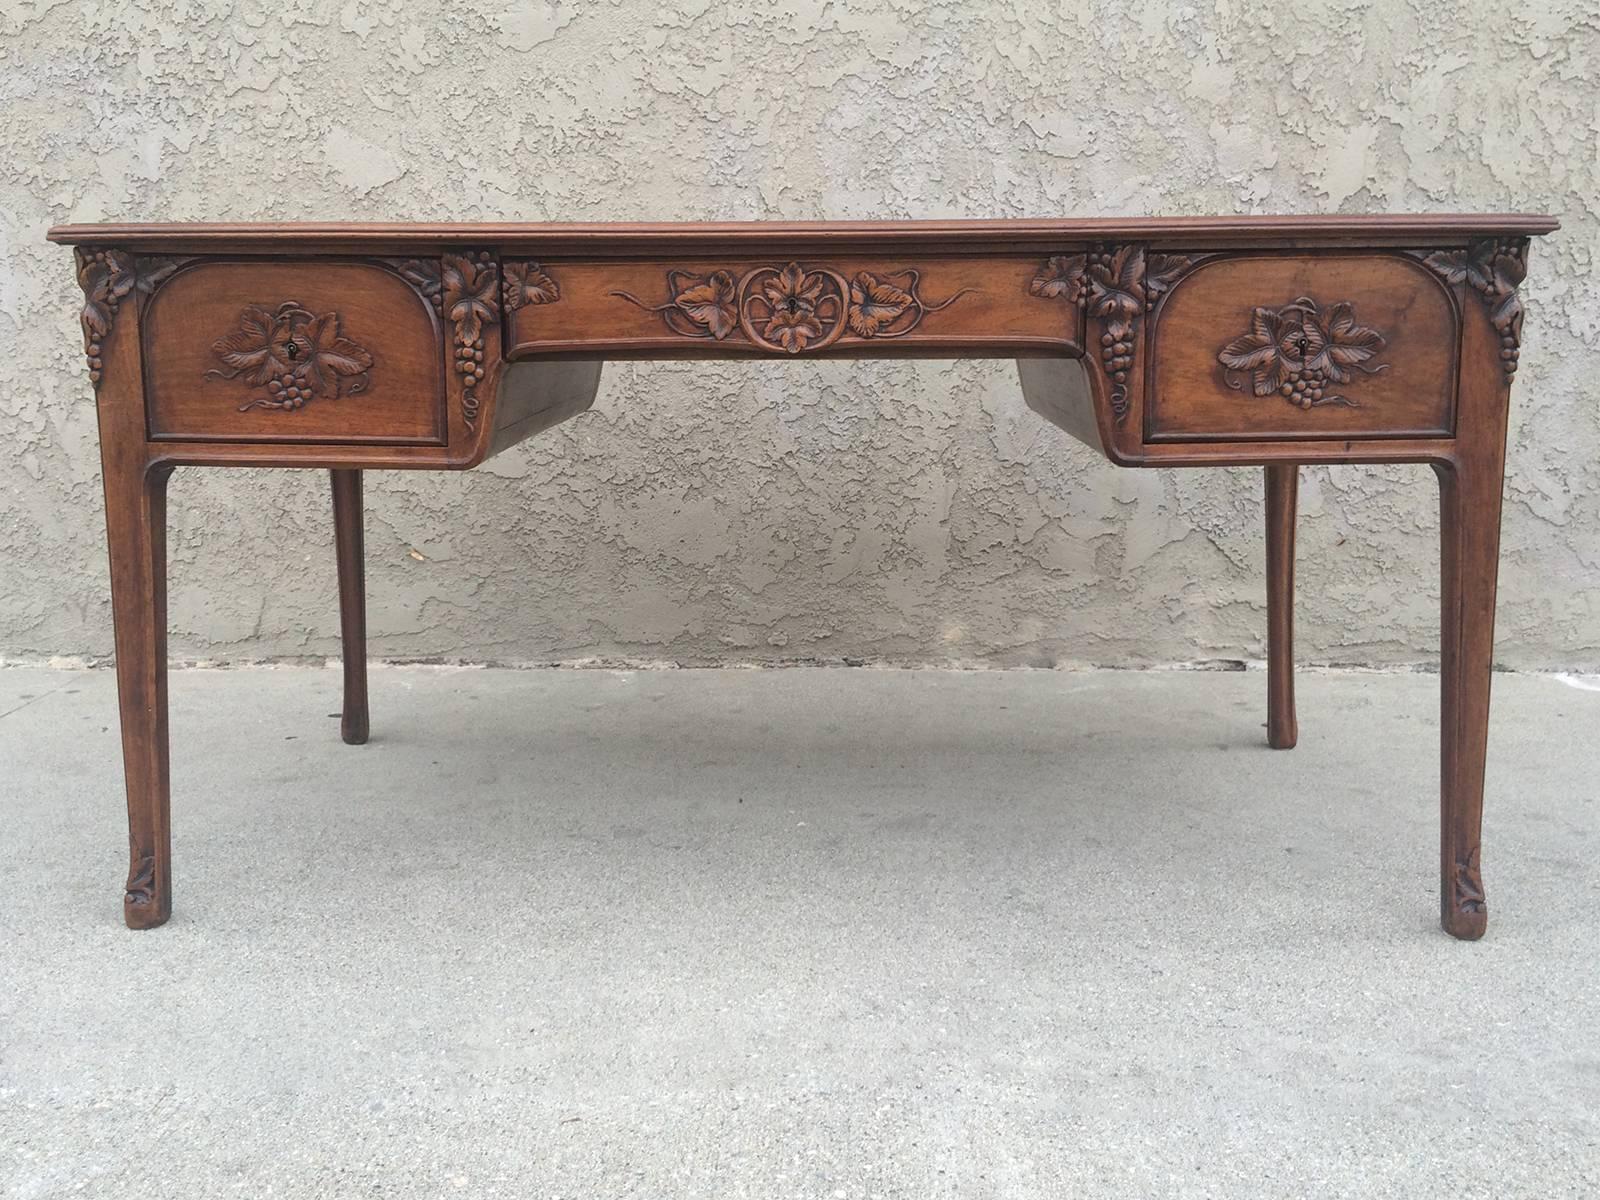 This Art Nouveau desk by Louis Majorelle features carved vine leaves and grapes detailing all around it and at the bottom of the feet.. As such it could be positioned against a wall or in the middle of a room.  The tabletop is inset with leather and